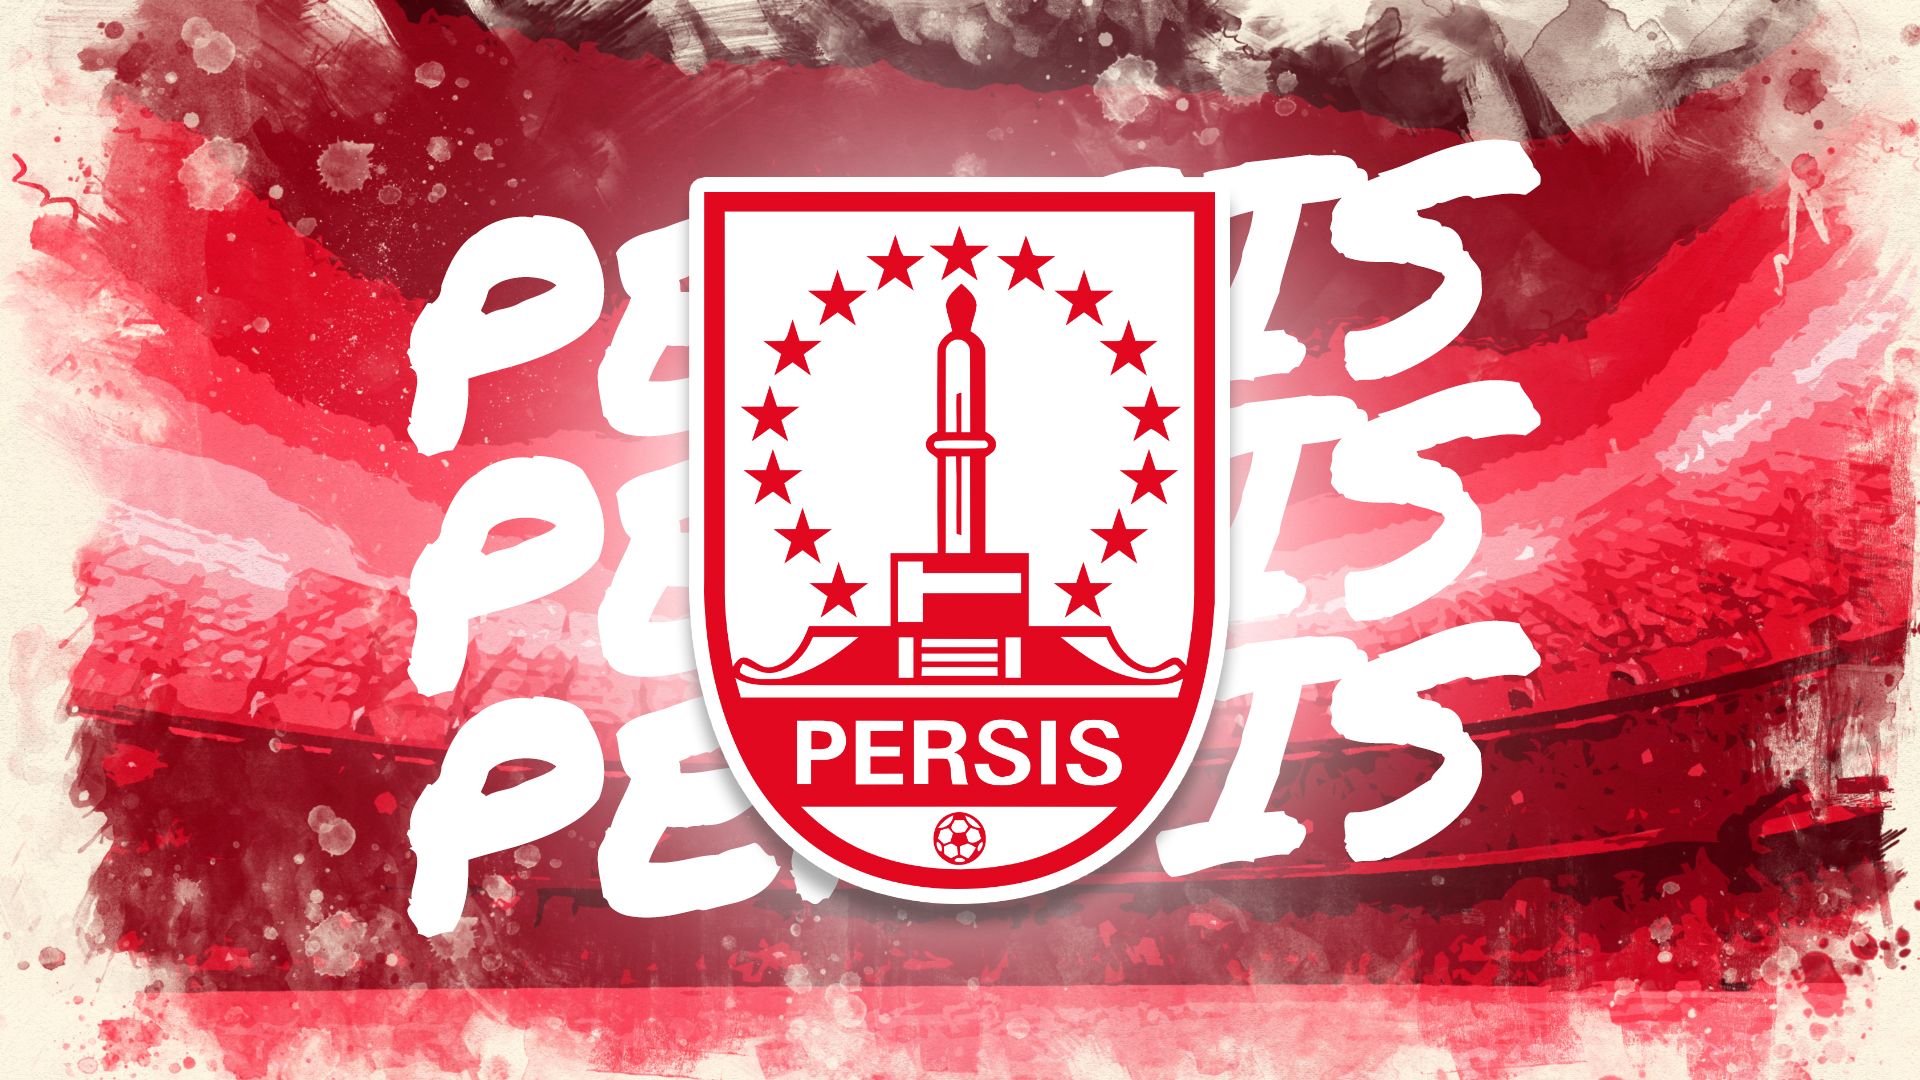 Cover Persis Solo.jpg